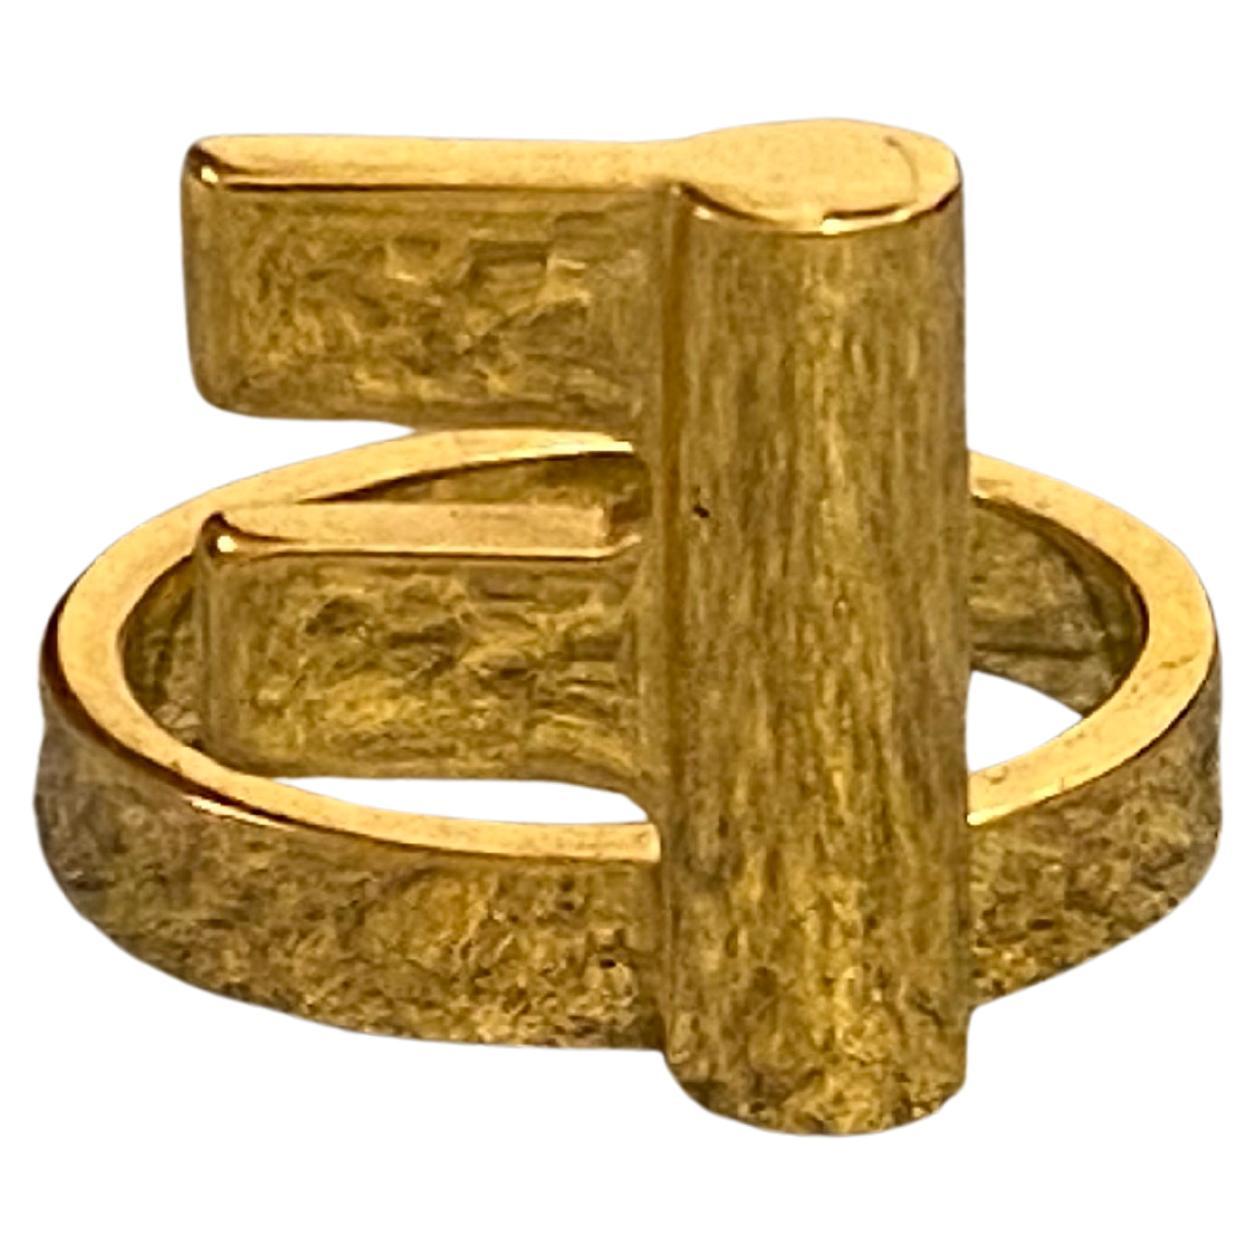 22 Karat Gold Key Ring by Romae Jewelry - Inspired by an Ancient Roman Design